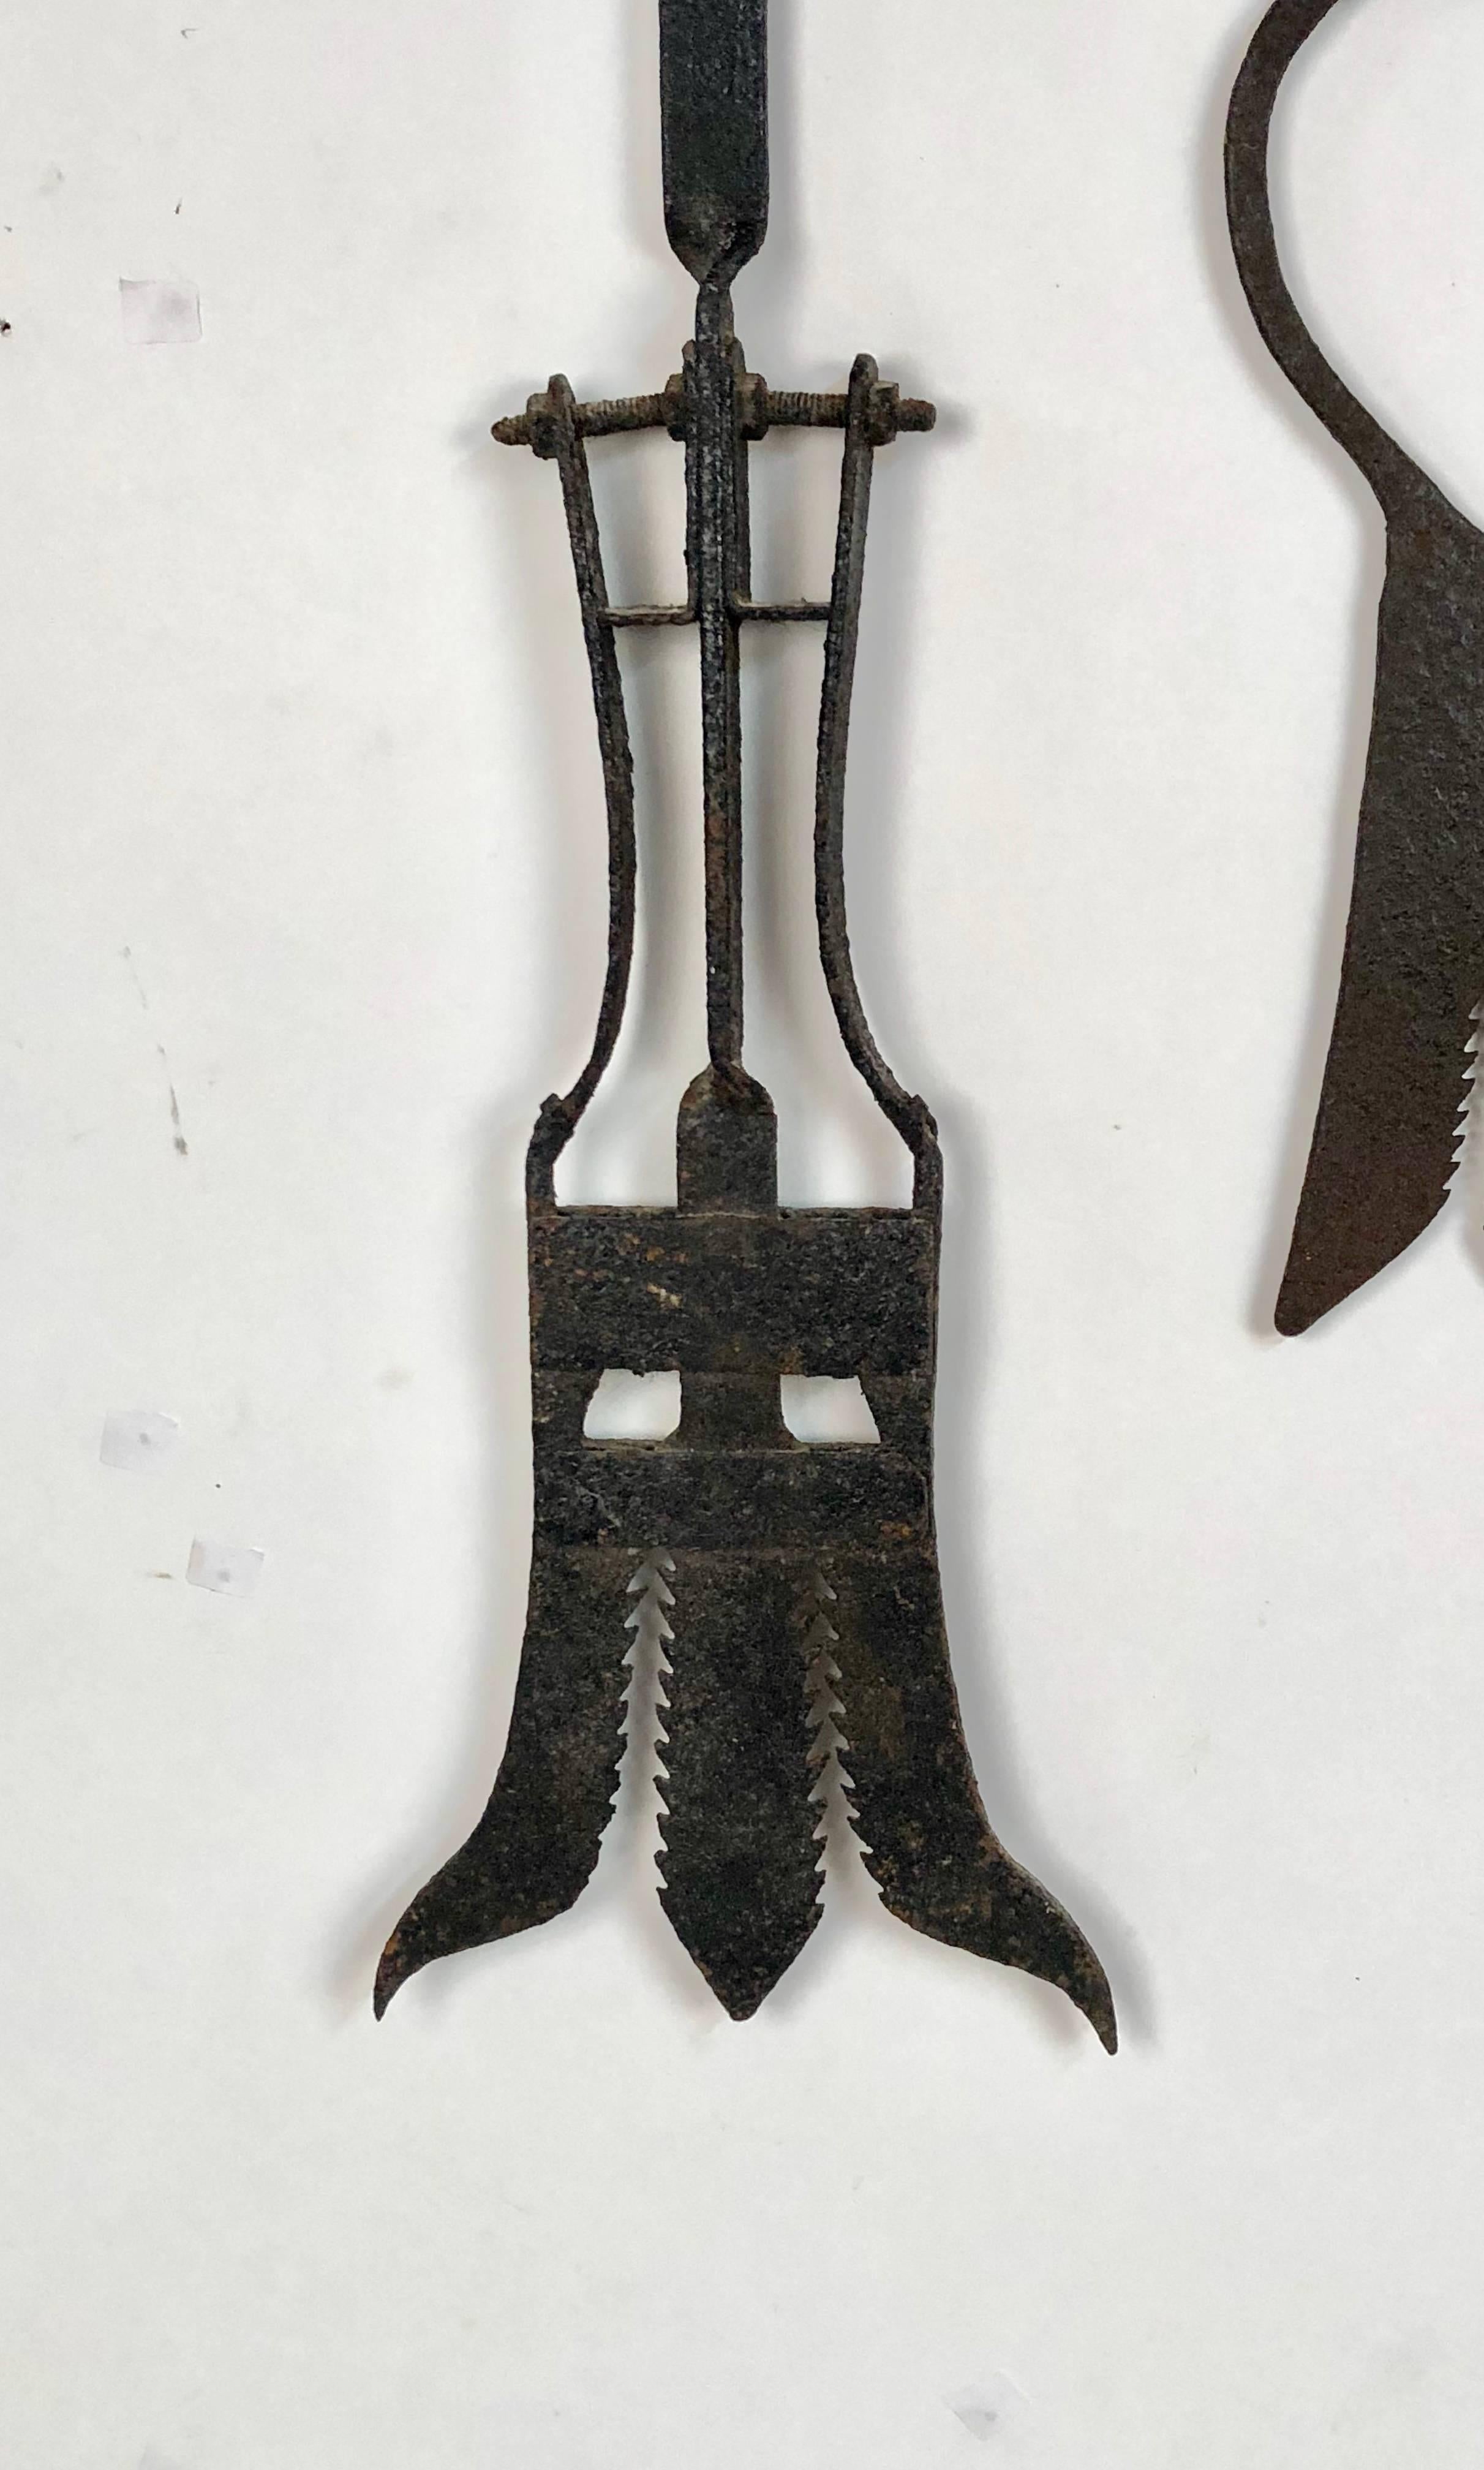 A collection of five Late 19th century antique hand-forged European Eel spears in various sizes. Ranging in length from 19 inches to 26 inches long. The widest of these is at 9.50 inches. This desirable set can be hung in many different styles to